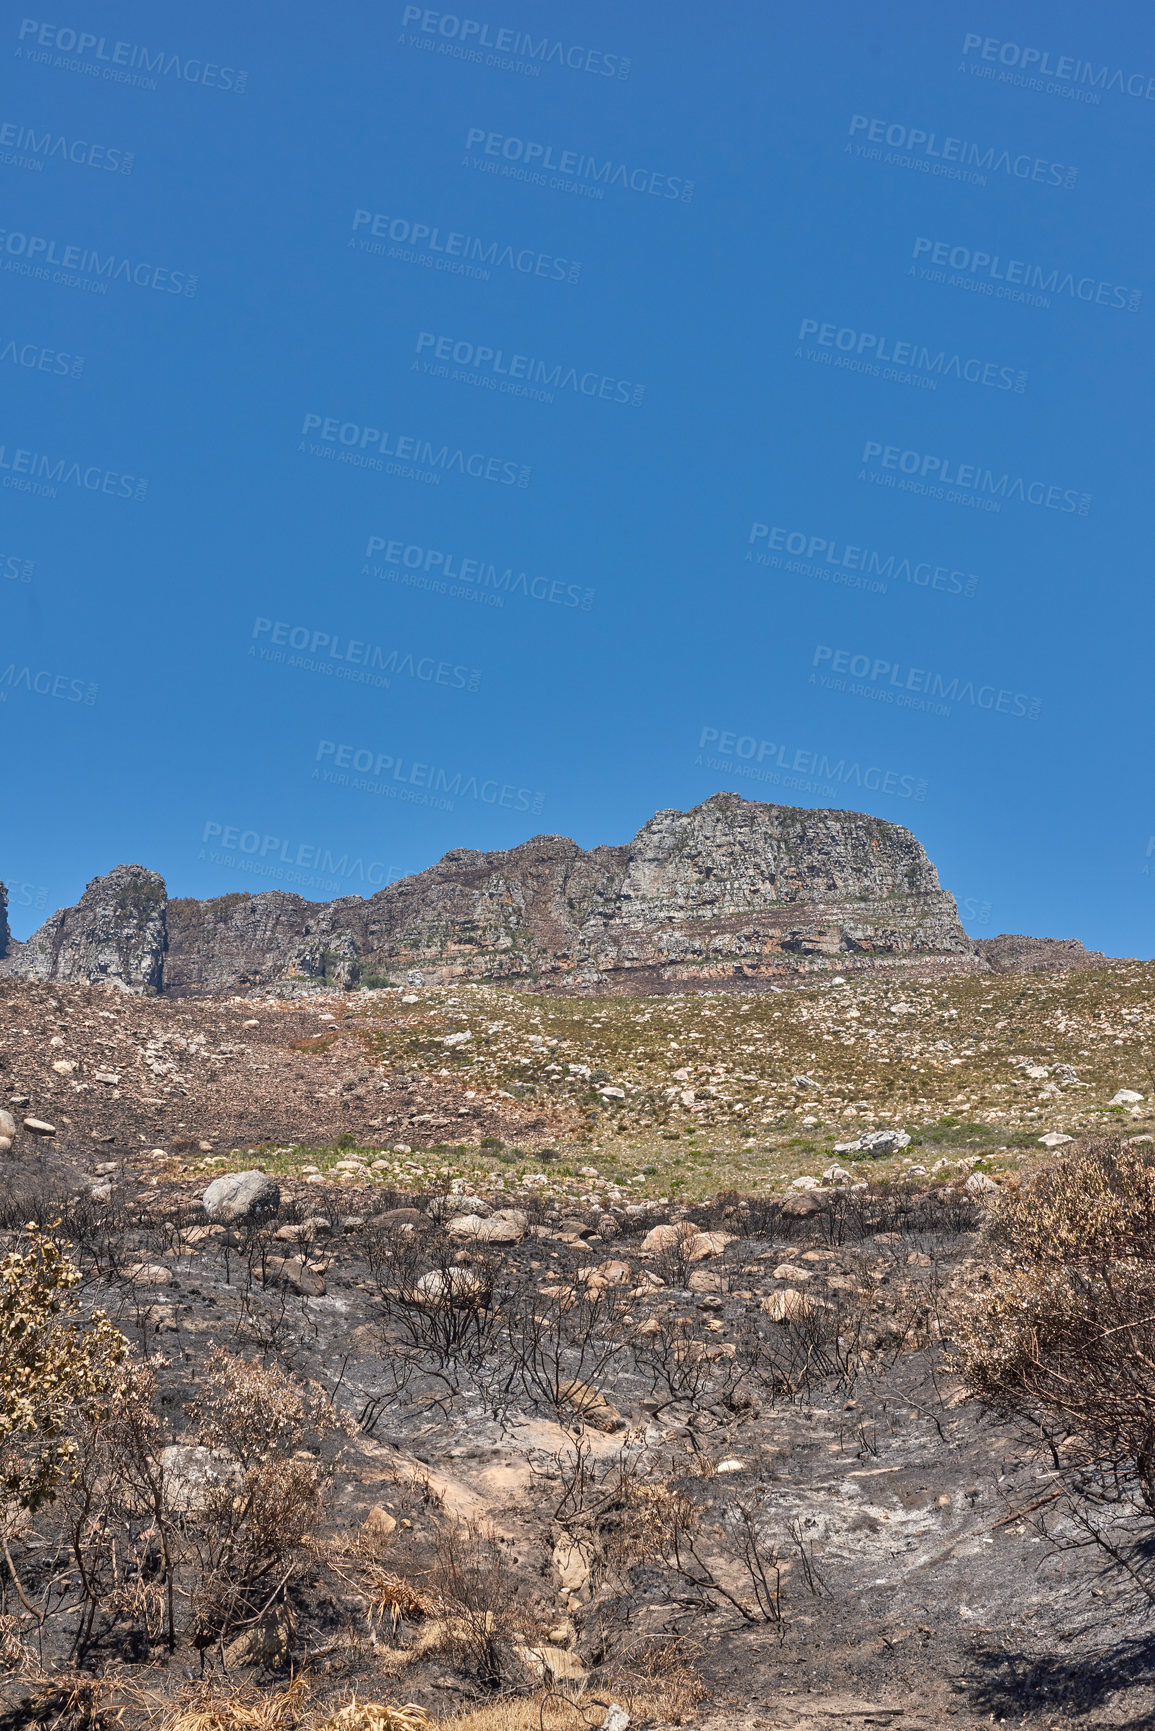 Buy stock photo The aftermath of a natural mountain landscape destroyed by wildfire destruction on table mountain in Cape Town, South Africa. Burnt bushes, shrubs, plants, and vegetation after a fire disaster
